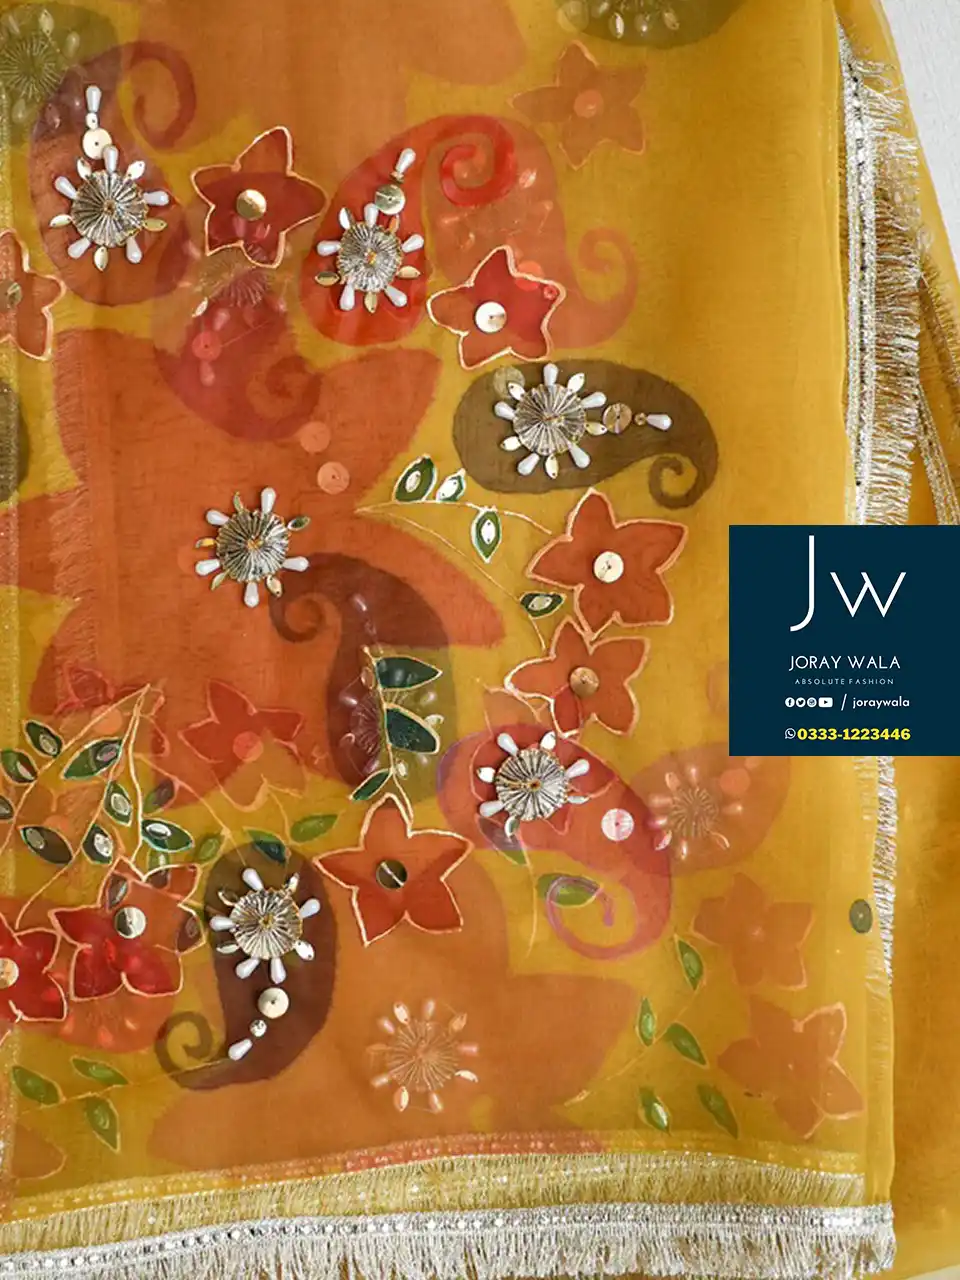 Partywear Fancy Dupatta | Yellow Rusty Floral Dupatta, this is beautiful hand painted dupatta available at joraywala